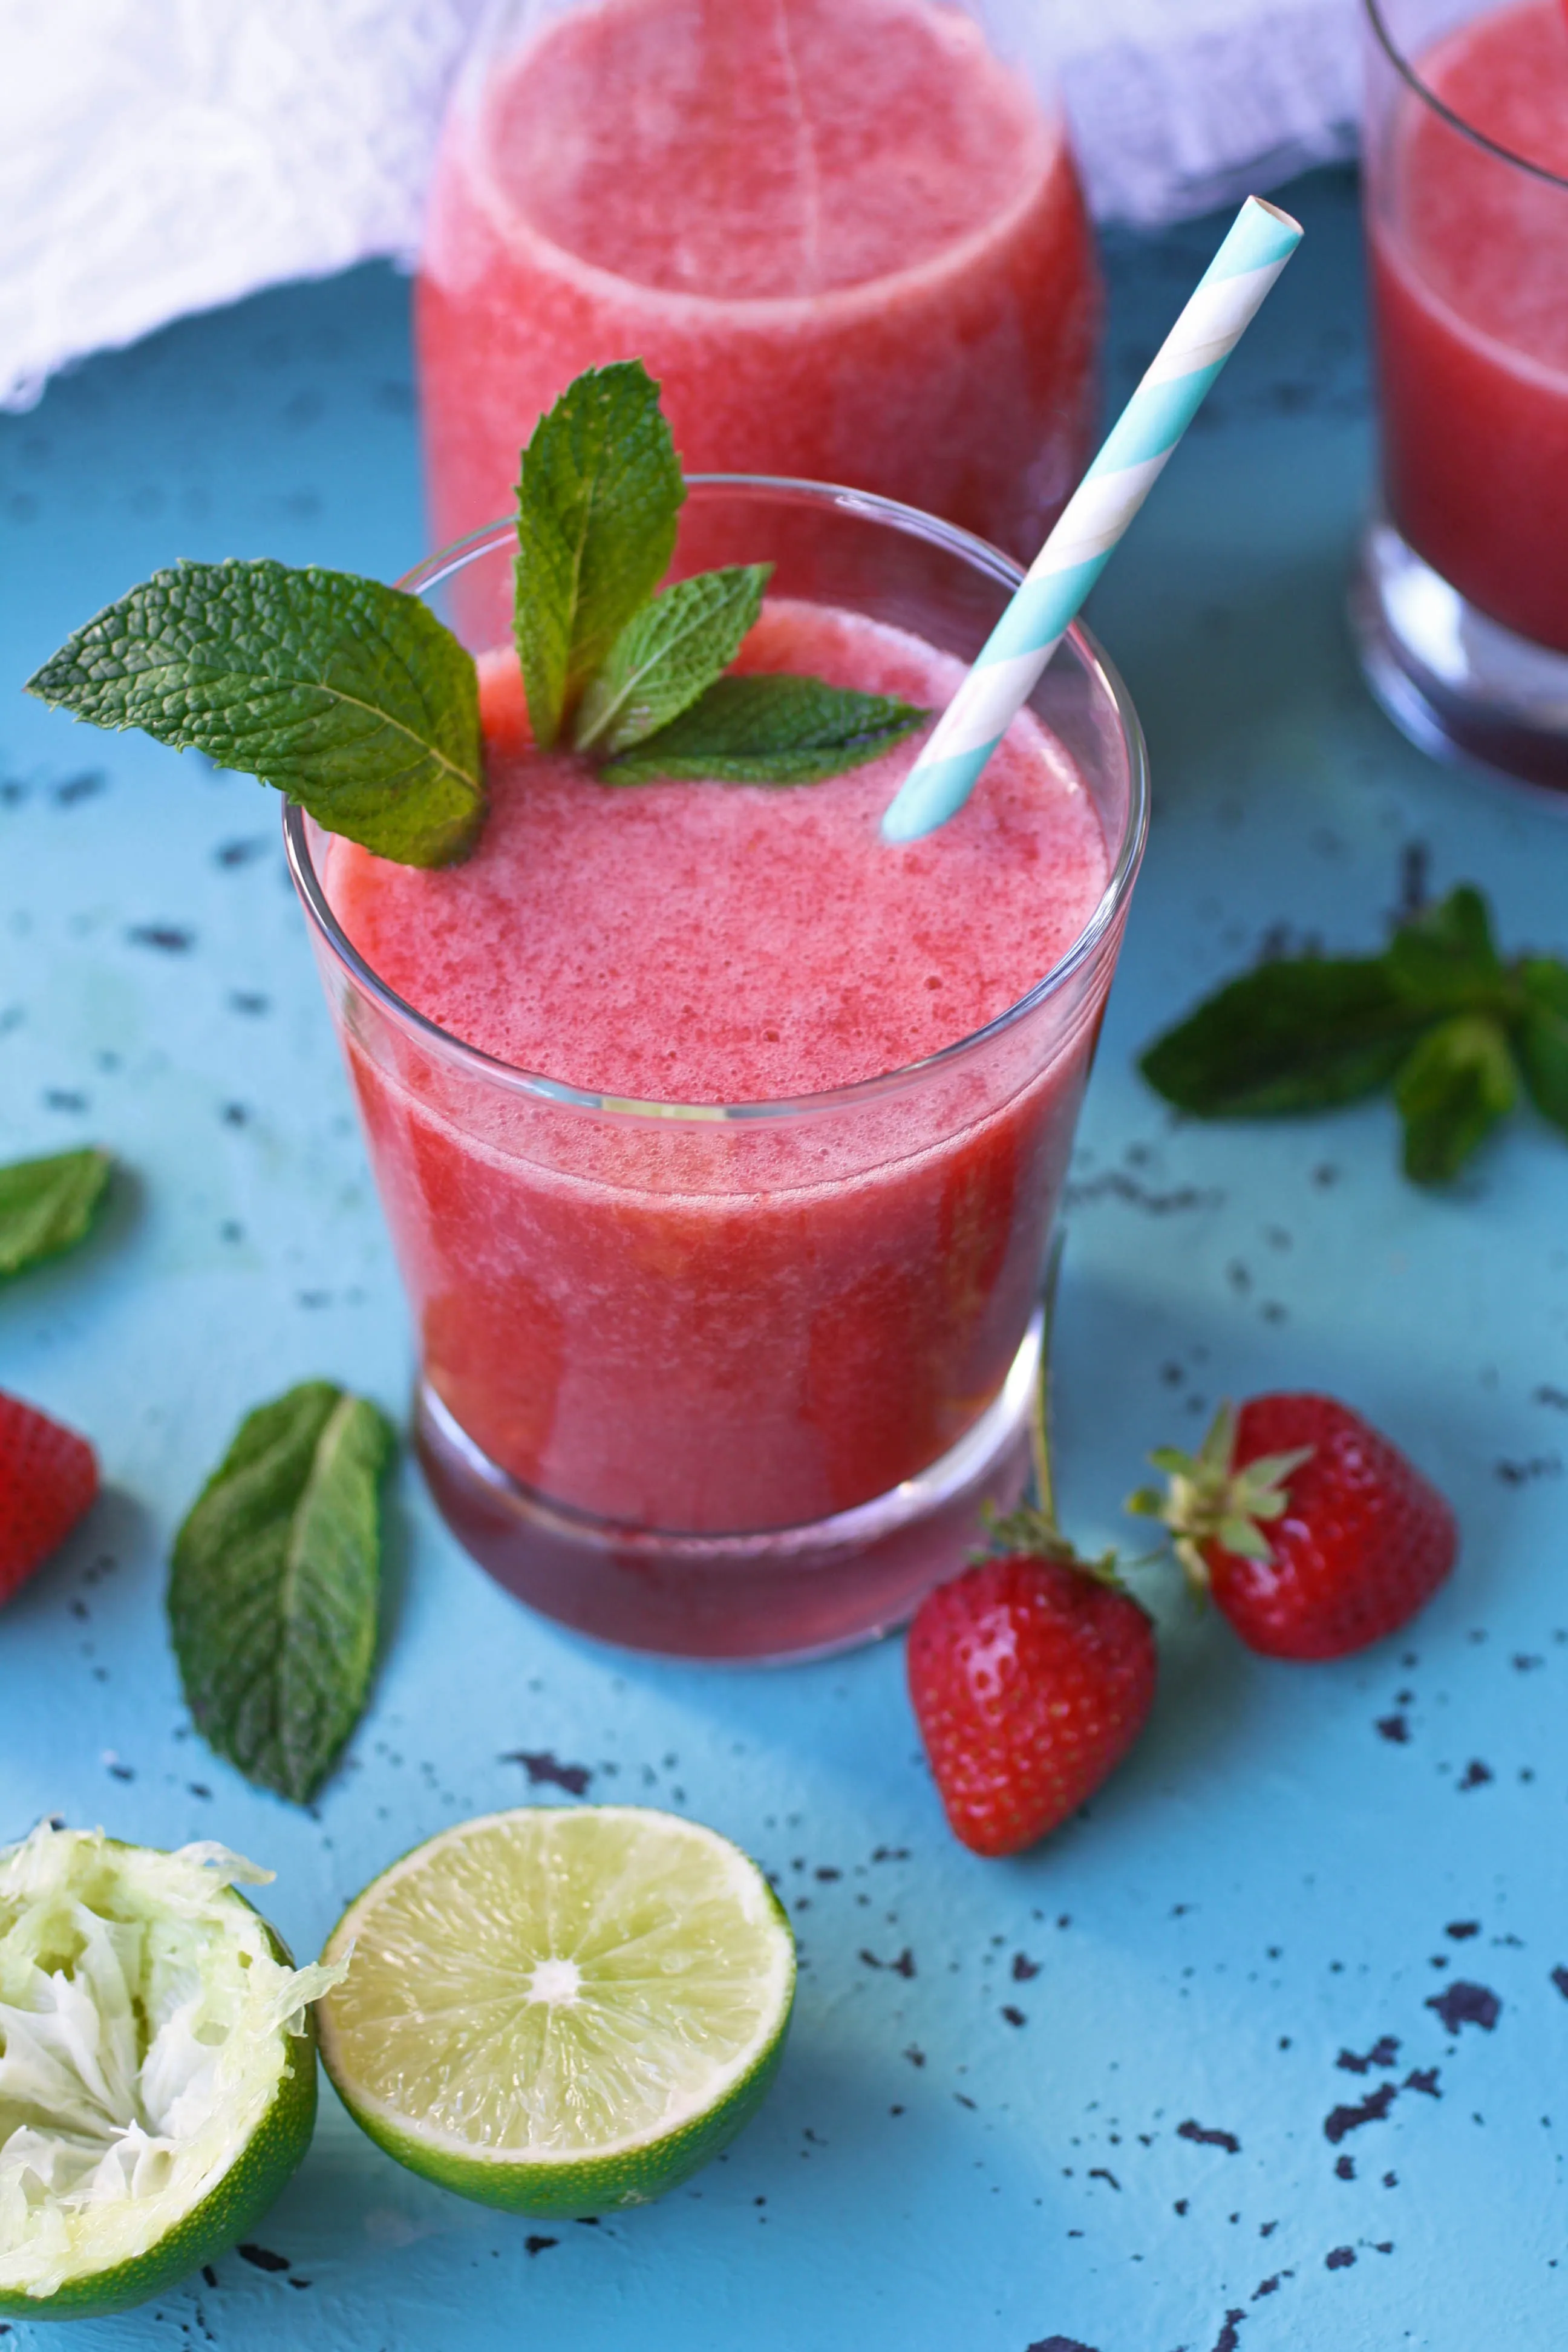 Strawberry-Mint Agua Fresca is a refreshing drink. You'll love the color and flavor!